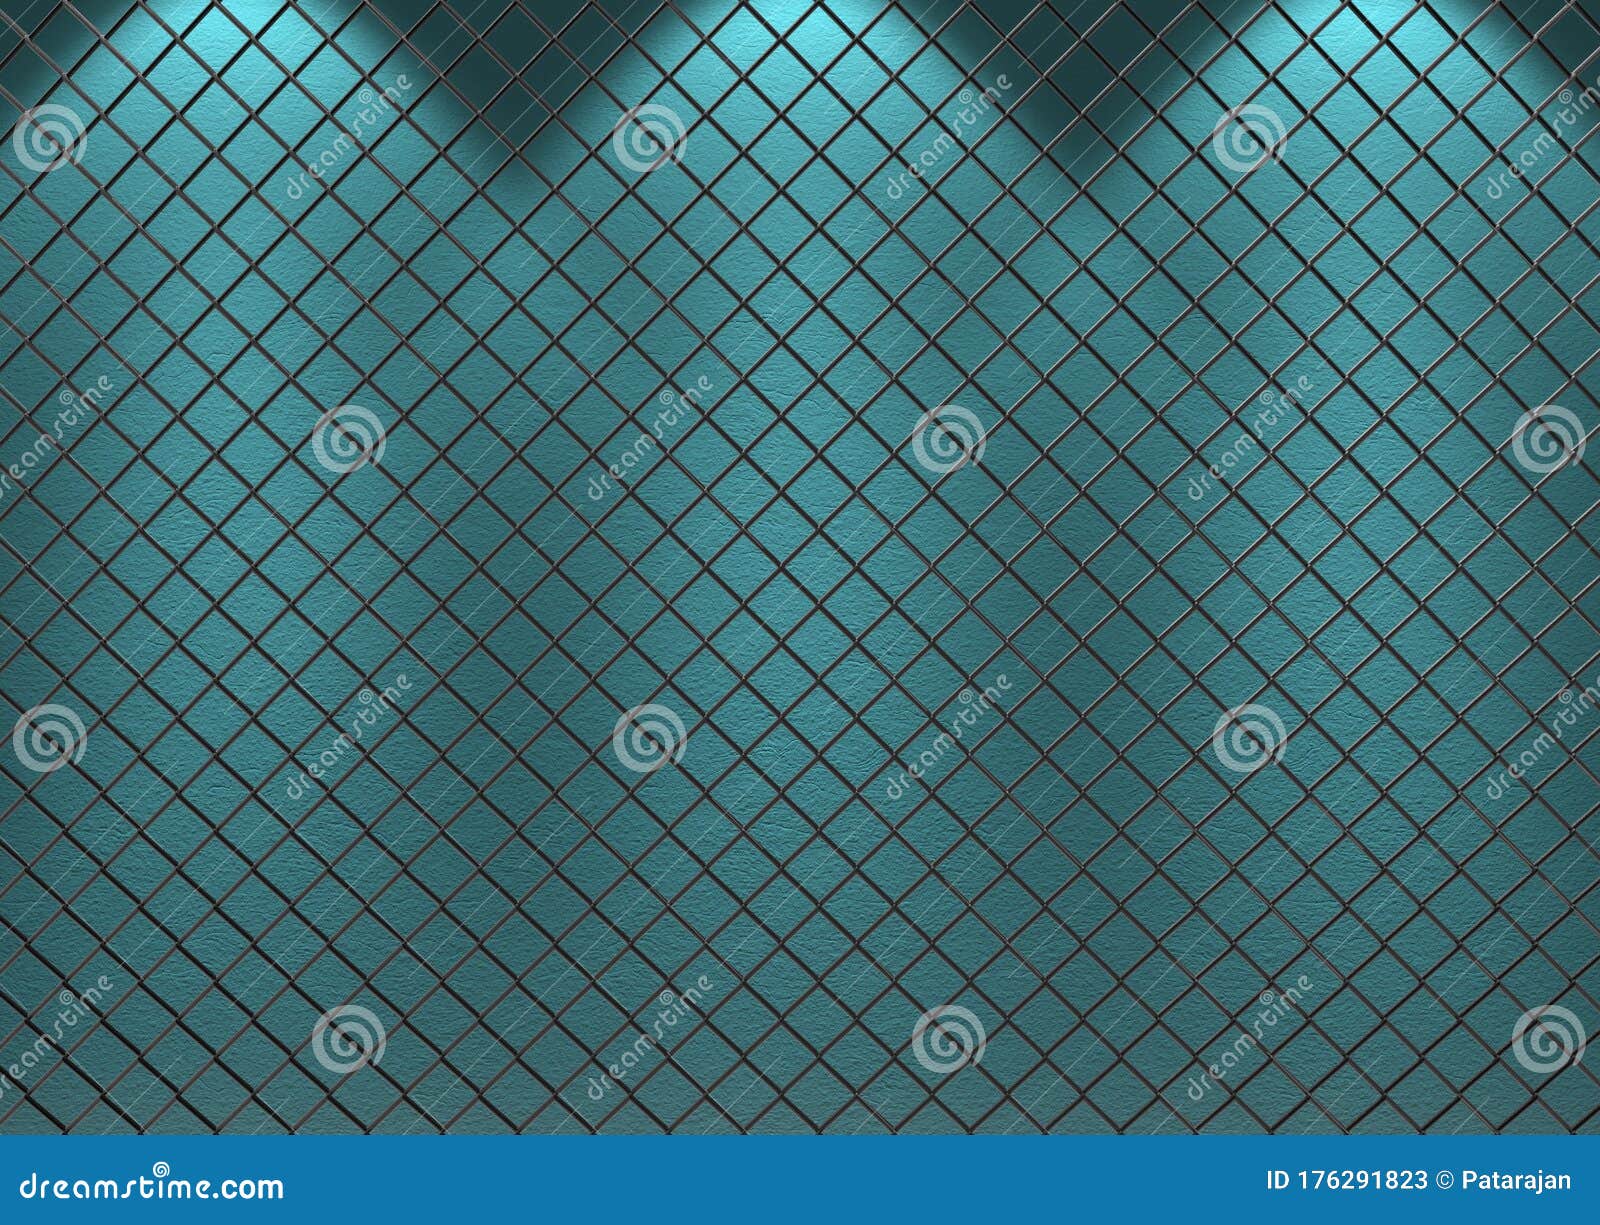 3d Rendering. Metal Grid Mesh with Blue Cerulean Color Cement Wall As ...